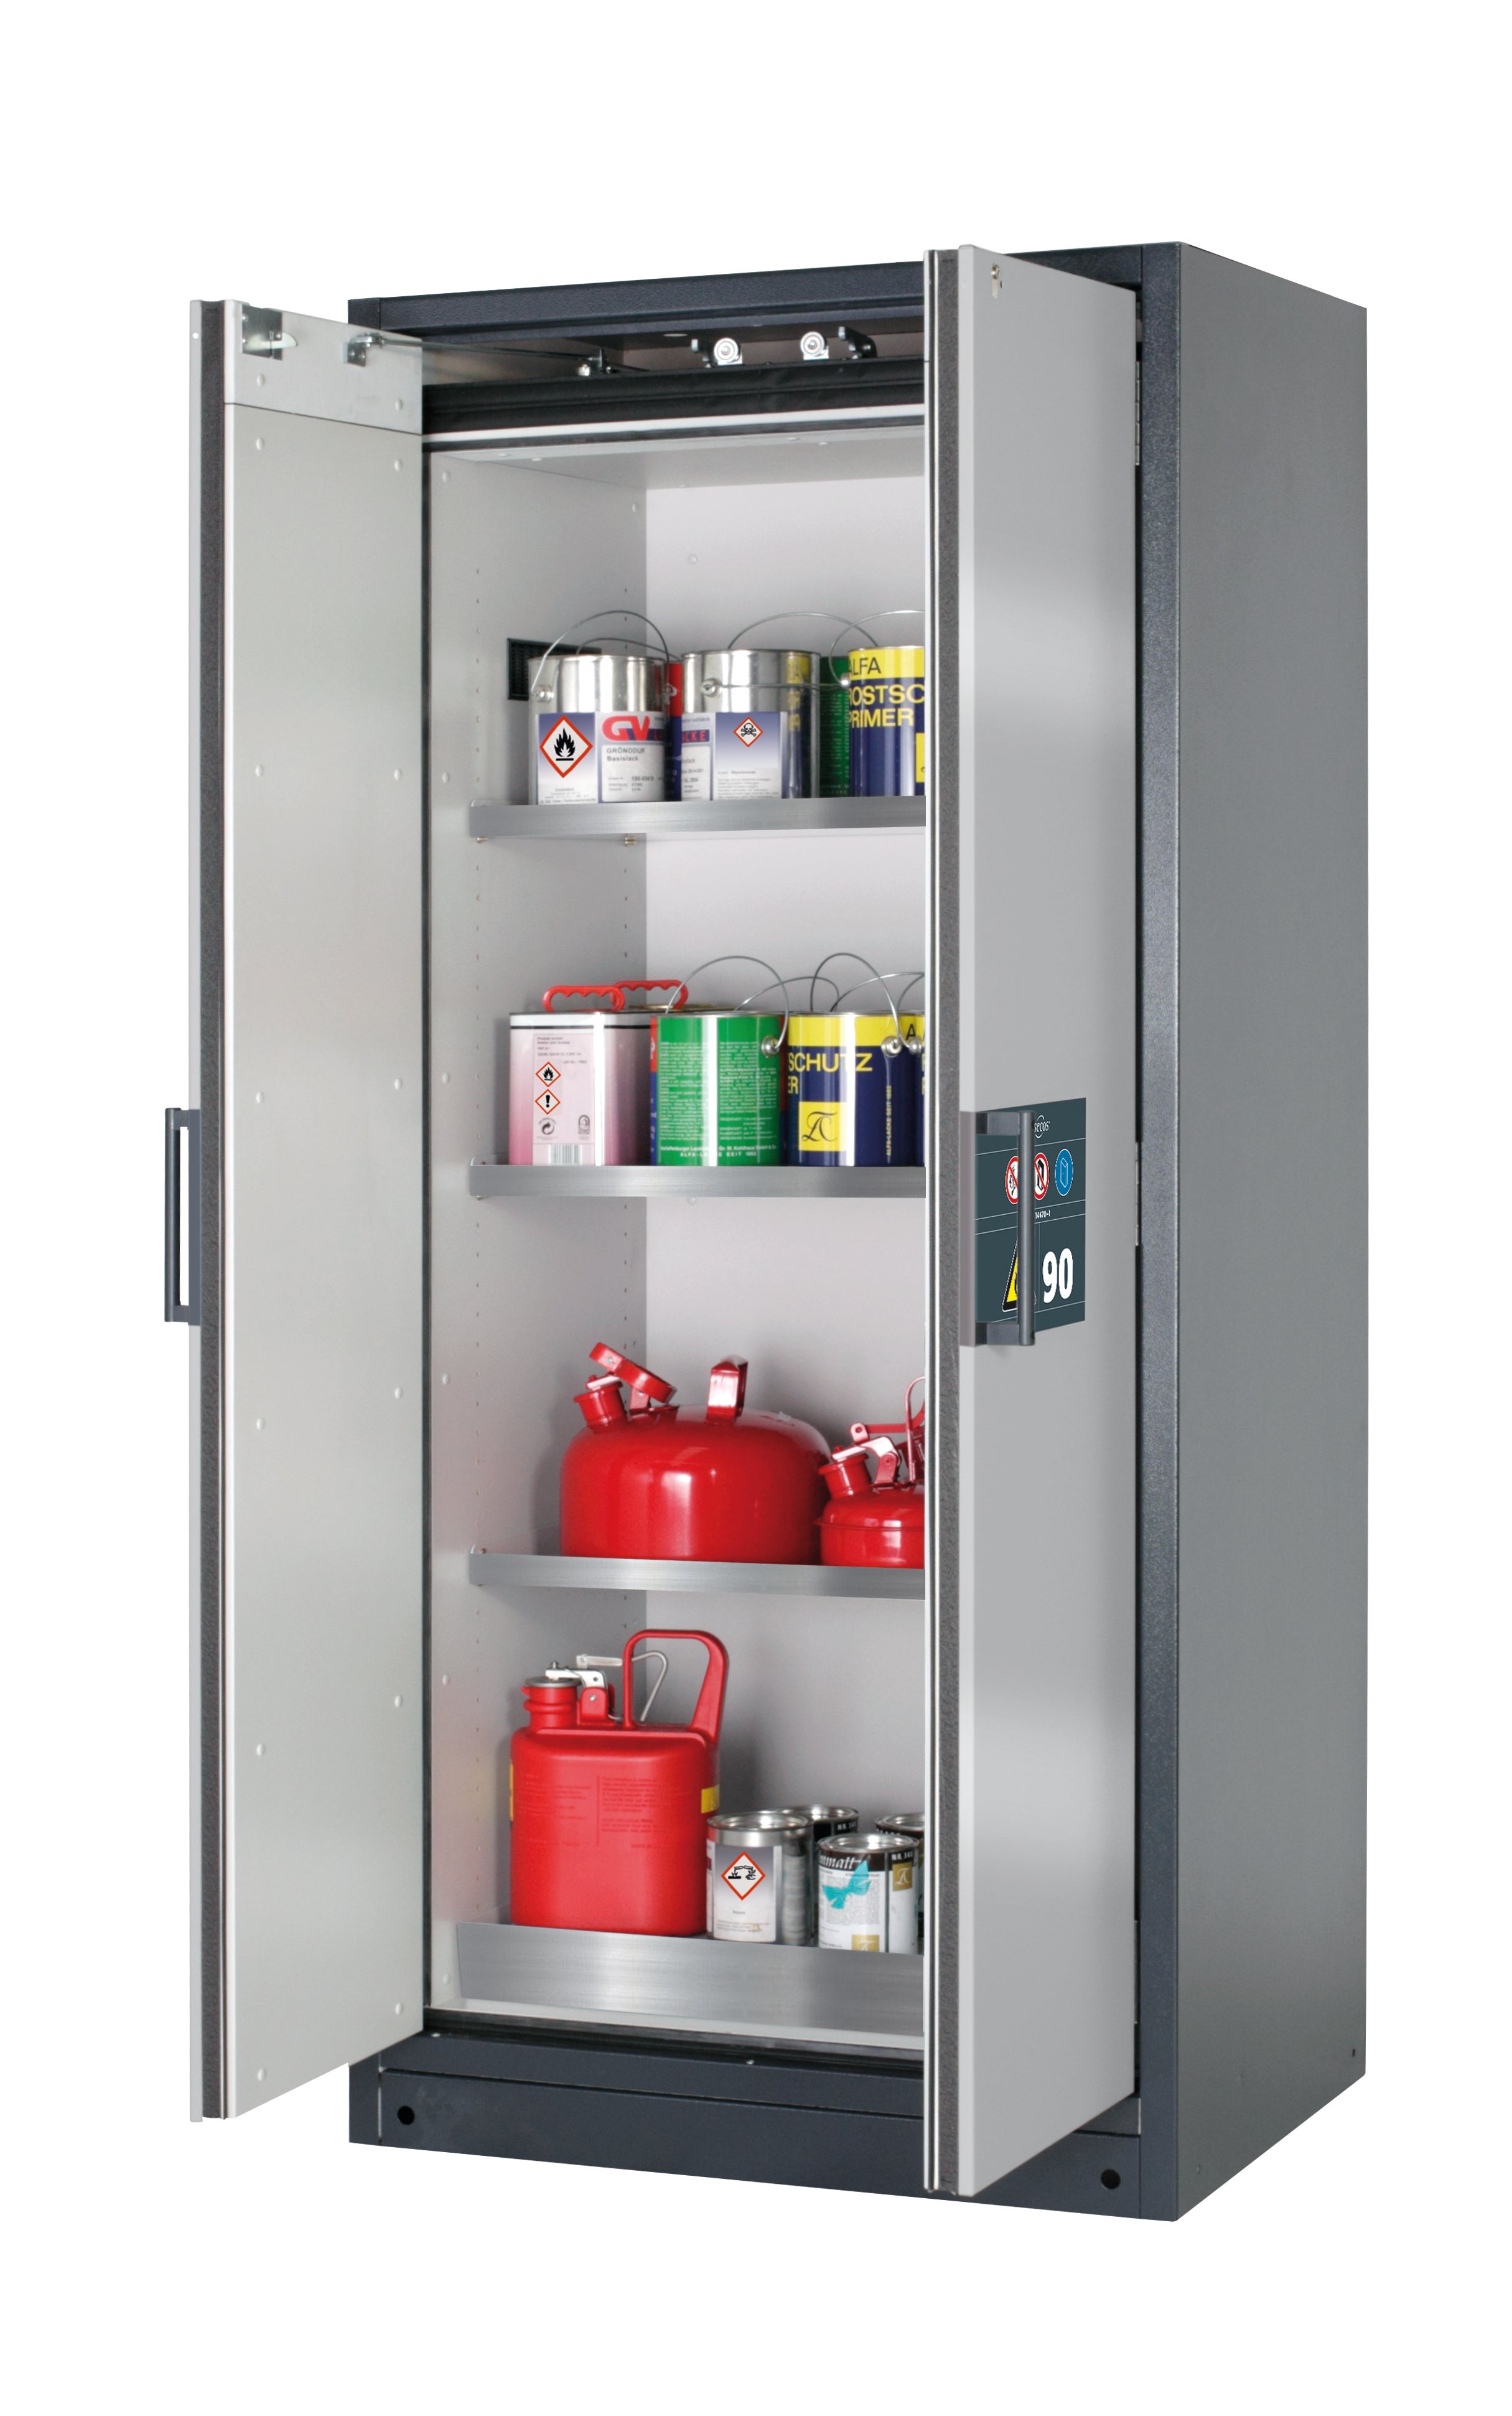 Type 90 safety storage cabinet Q-CLASSIC-90 model Q90.195.090 in asecos silver with 3x shelf standard (stainless steel 1.4301),